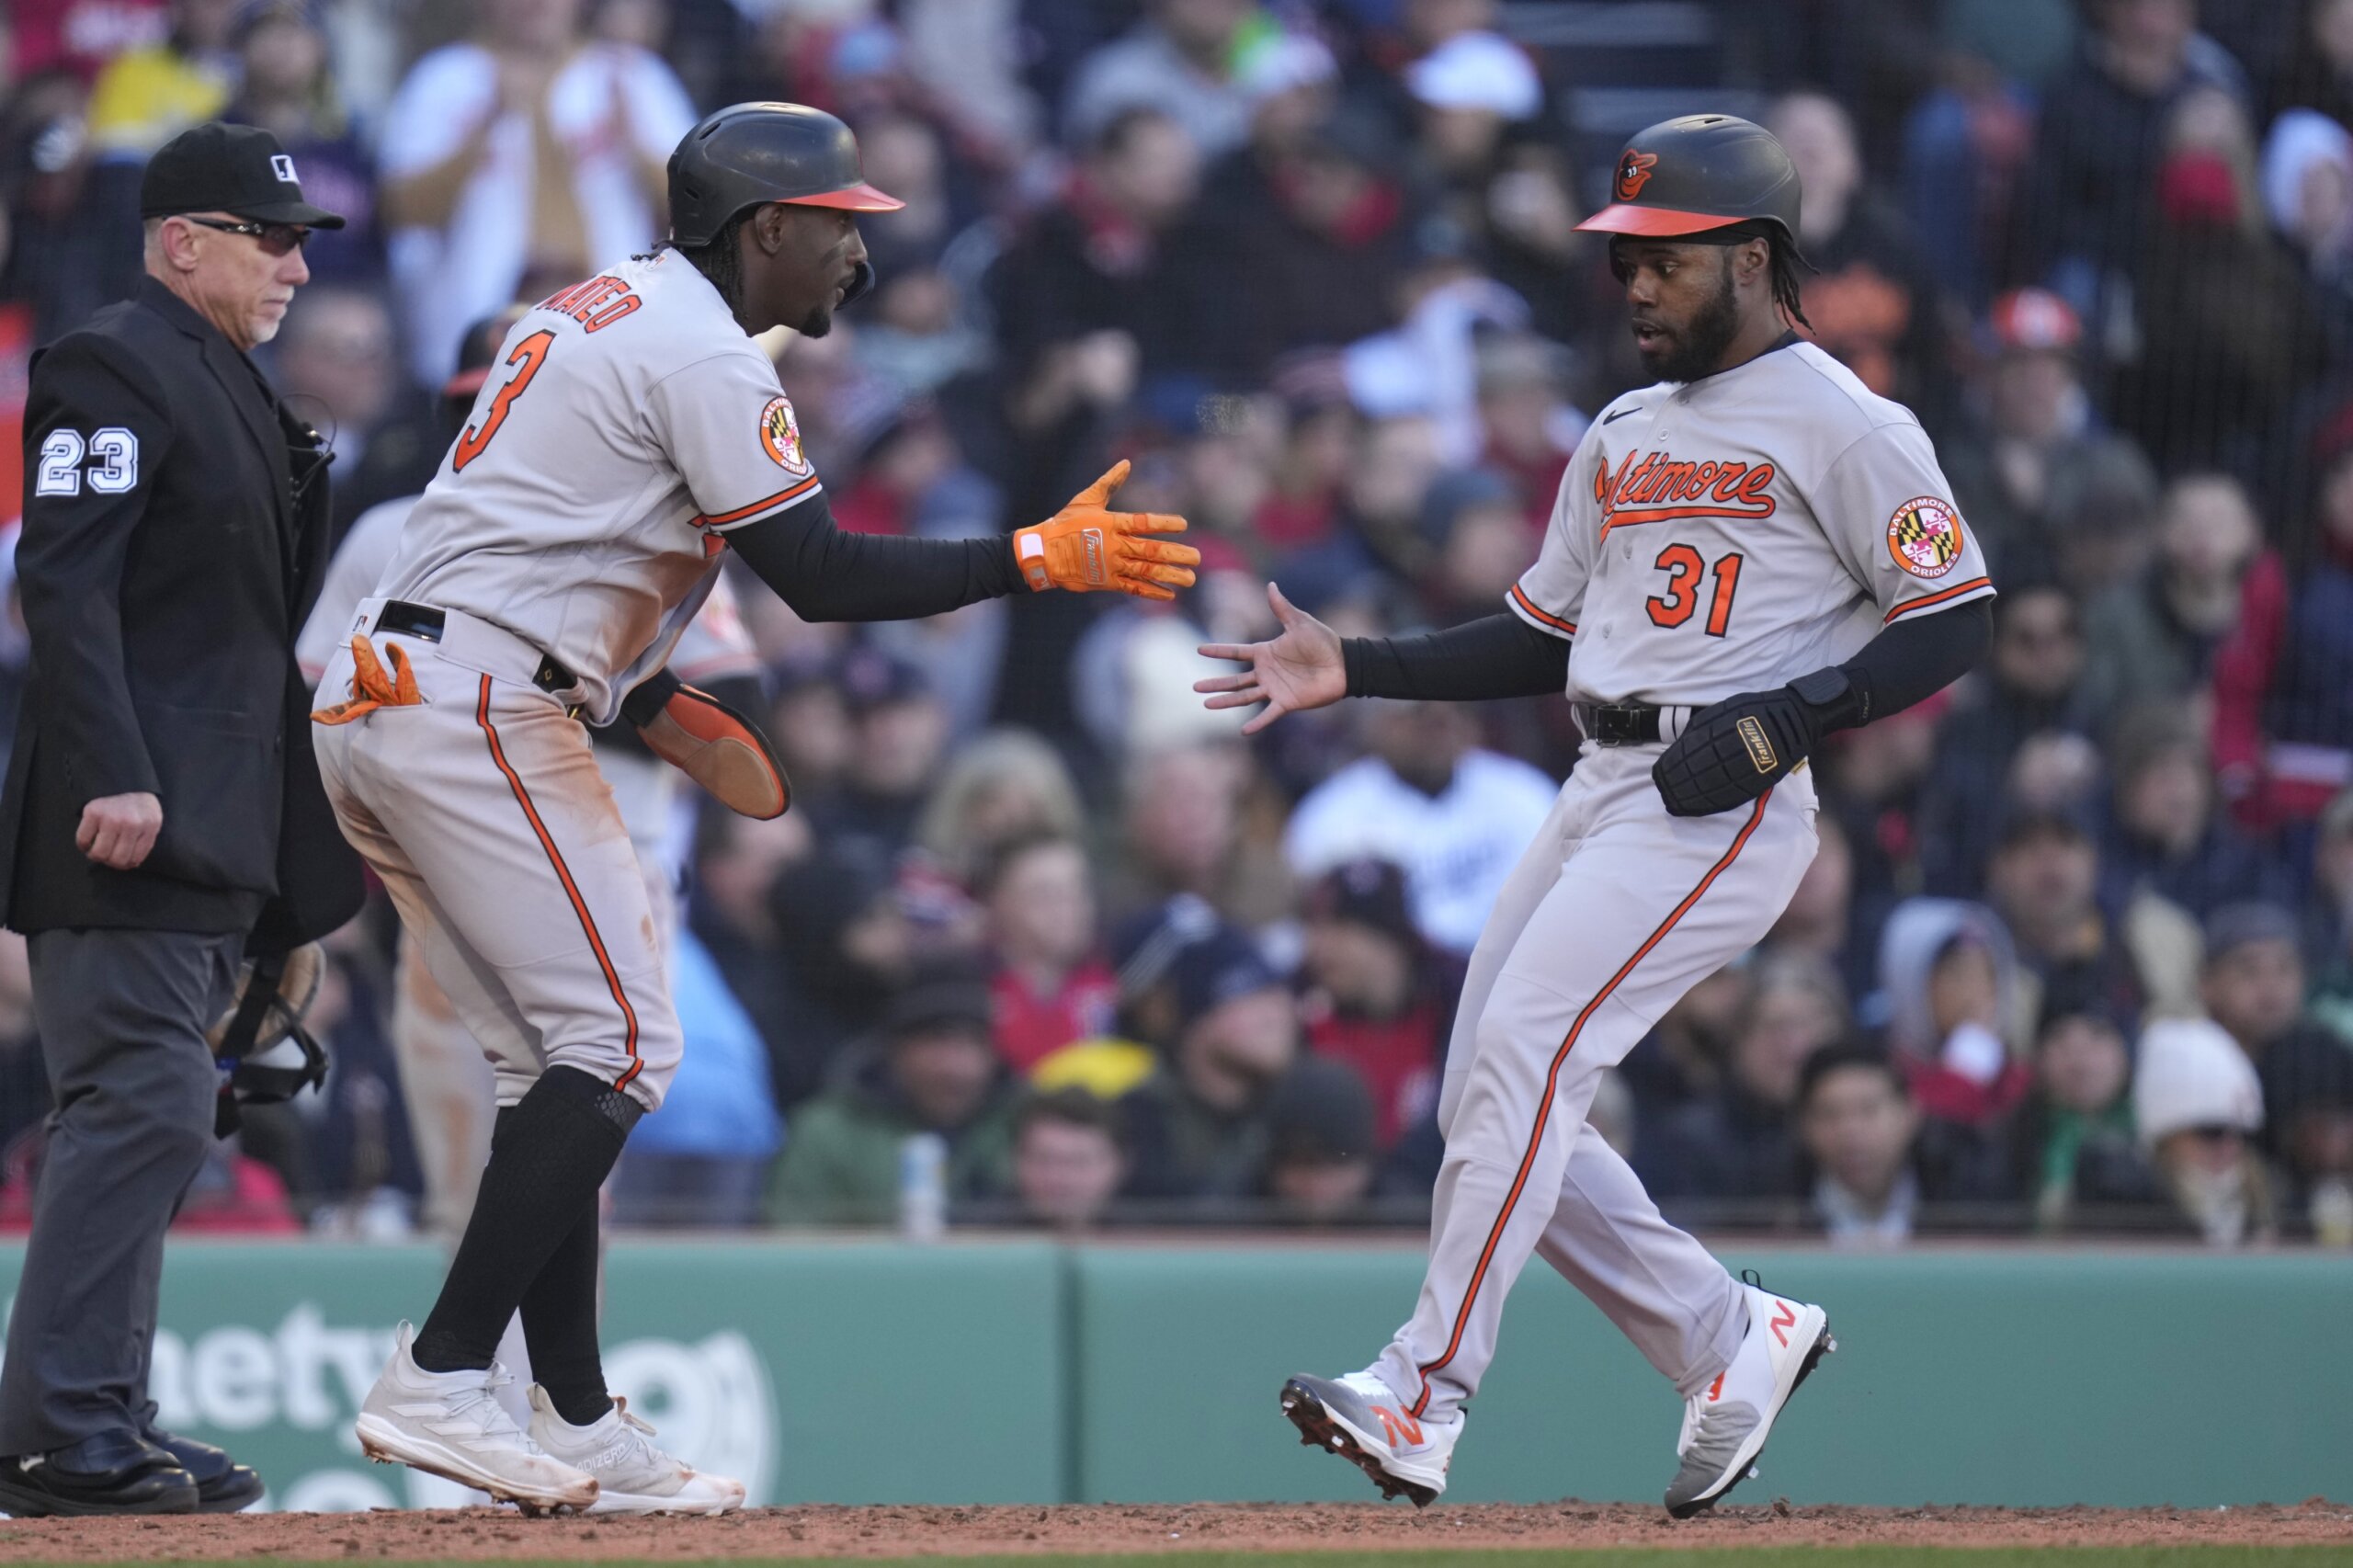 Other teams have locked up their young stars. Will the Orioles do